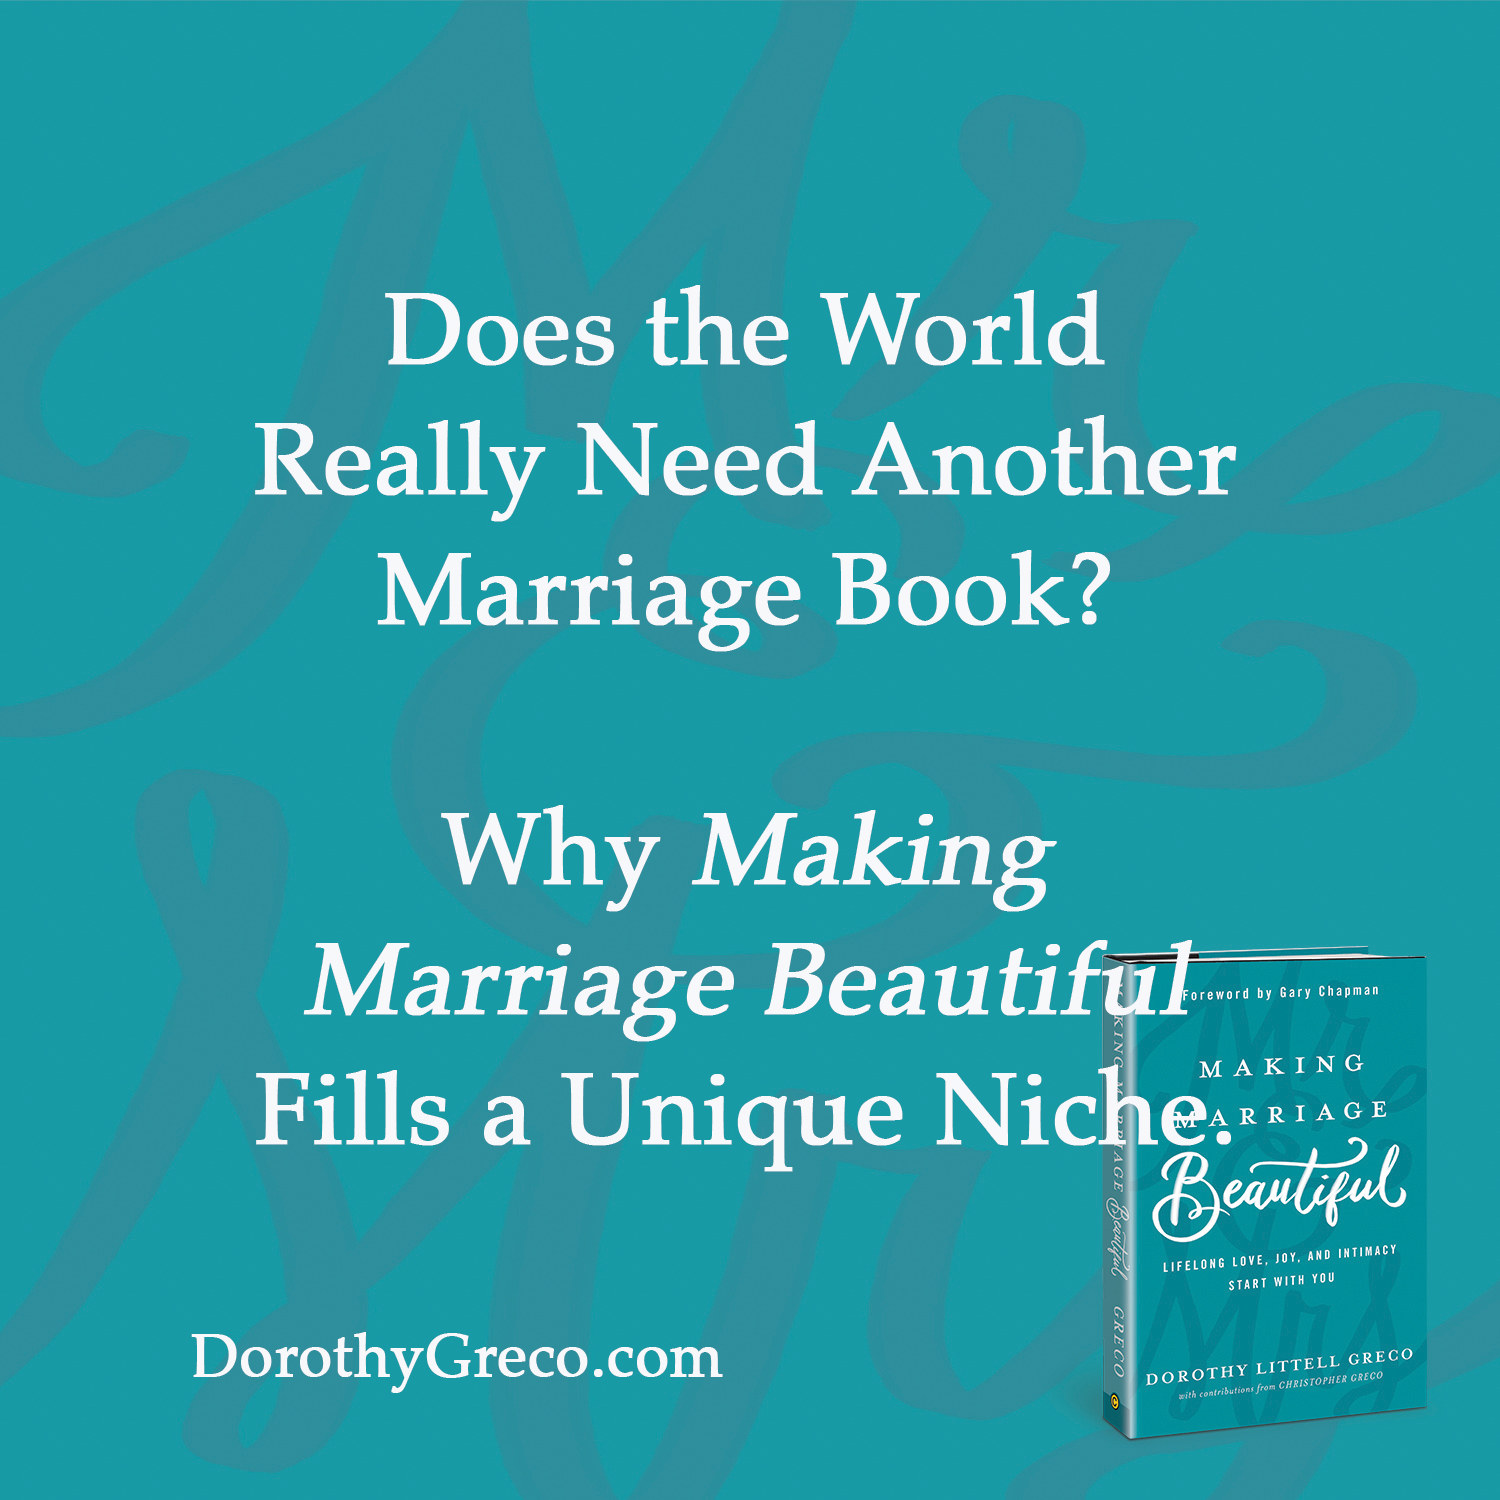 Does the World Need Another Marriage Book? Why Making Marriage Beautiful Fills a Unique Niche